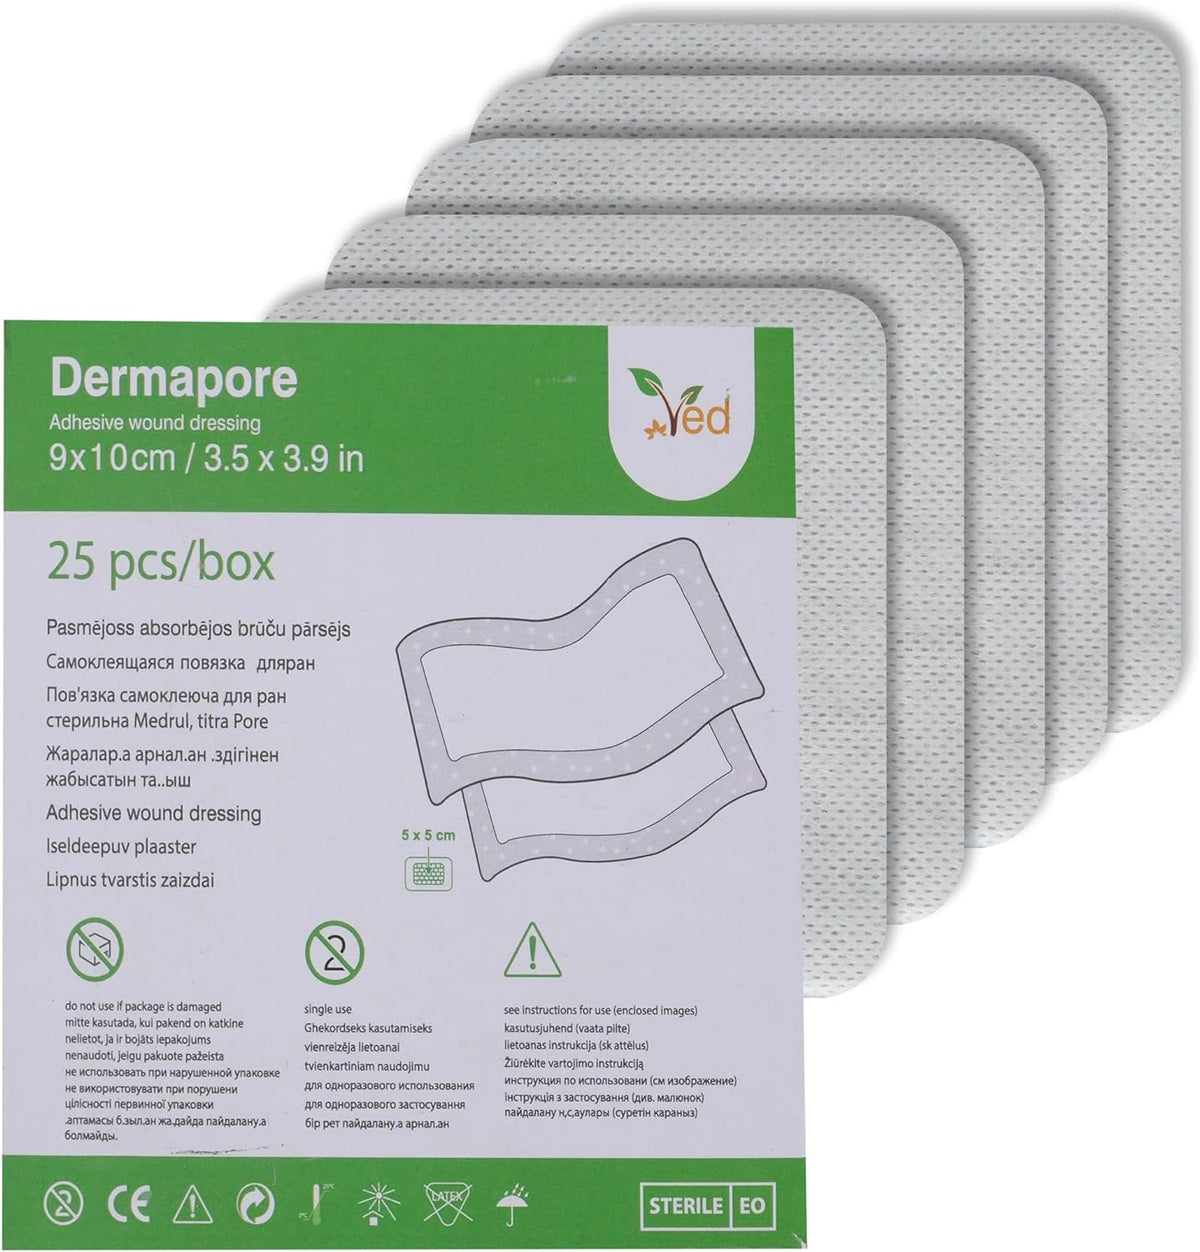 VED Dermapore Adhesive Wound Dressing- Suitable for cuts and grazes, Diabetic Leg ulcers, venous Leg ulcers, Small Pressure sores- Medium, 9 x 10cm (Pack of 25).